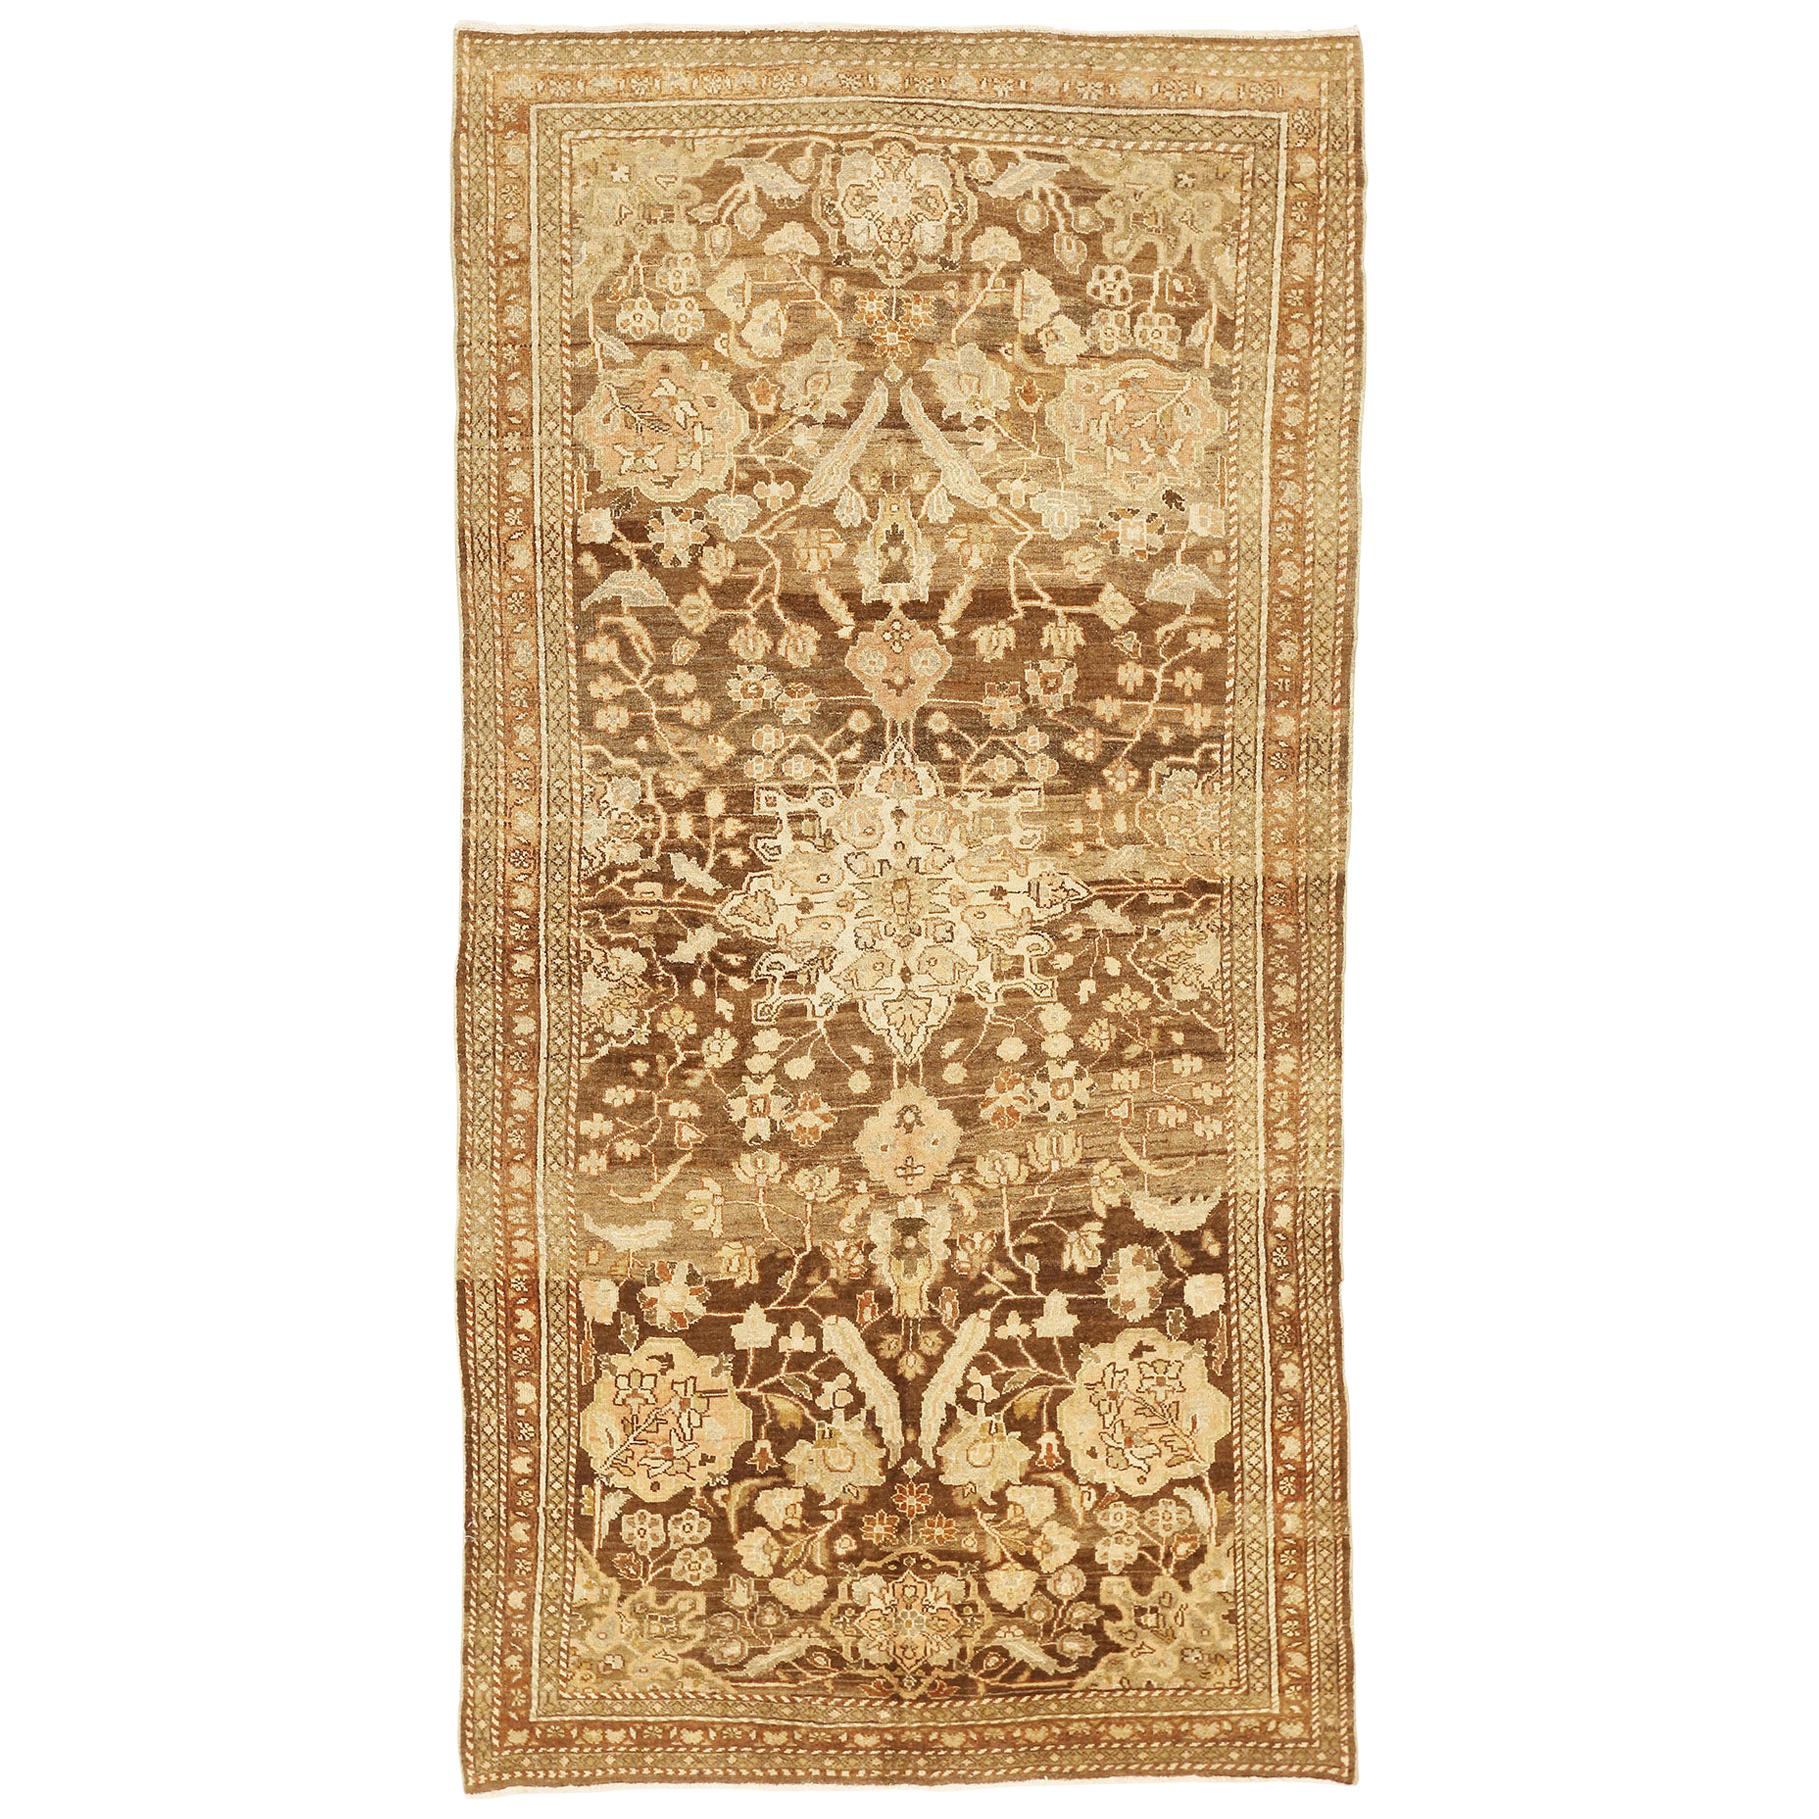 Antique Persian Mahal Rug with Ivory and Gray Floral Details on Brown Field